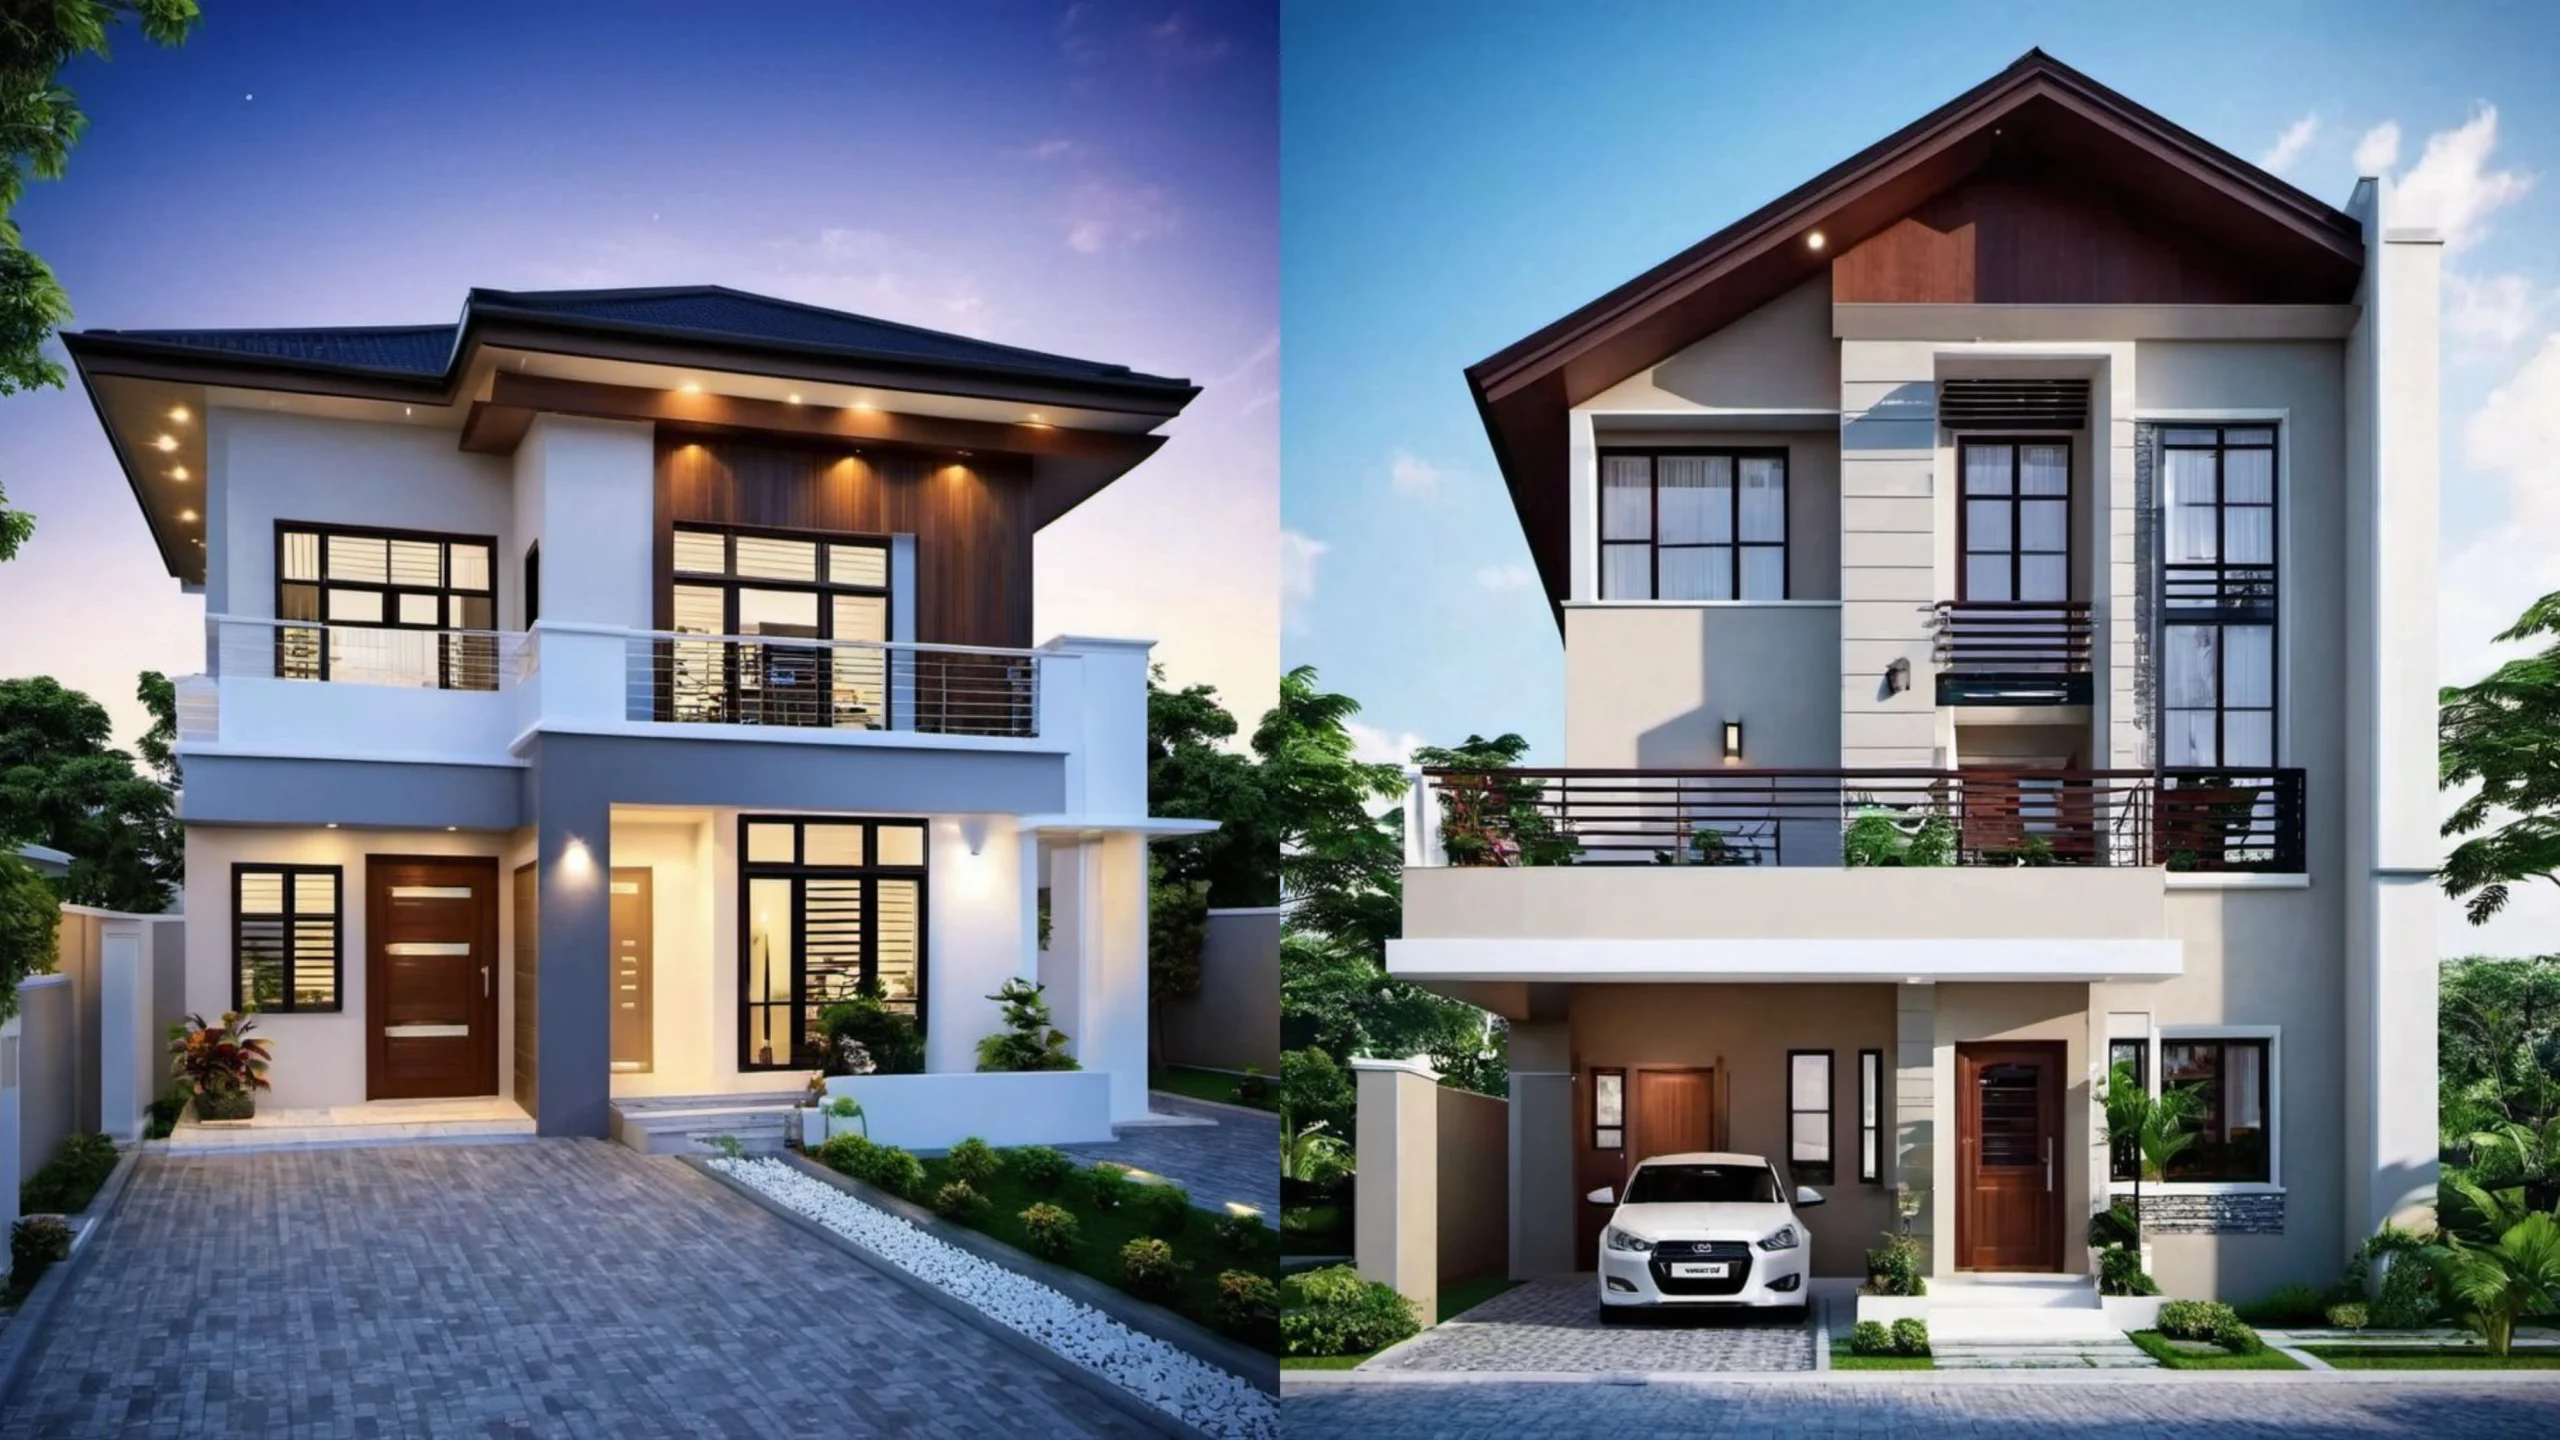 15 Simple and Unique 2 Storey House Designs that Give a Modern Impression scaled